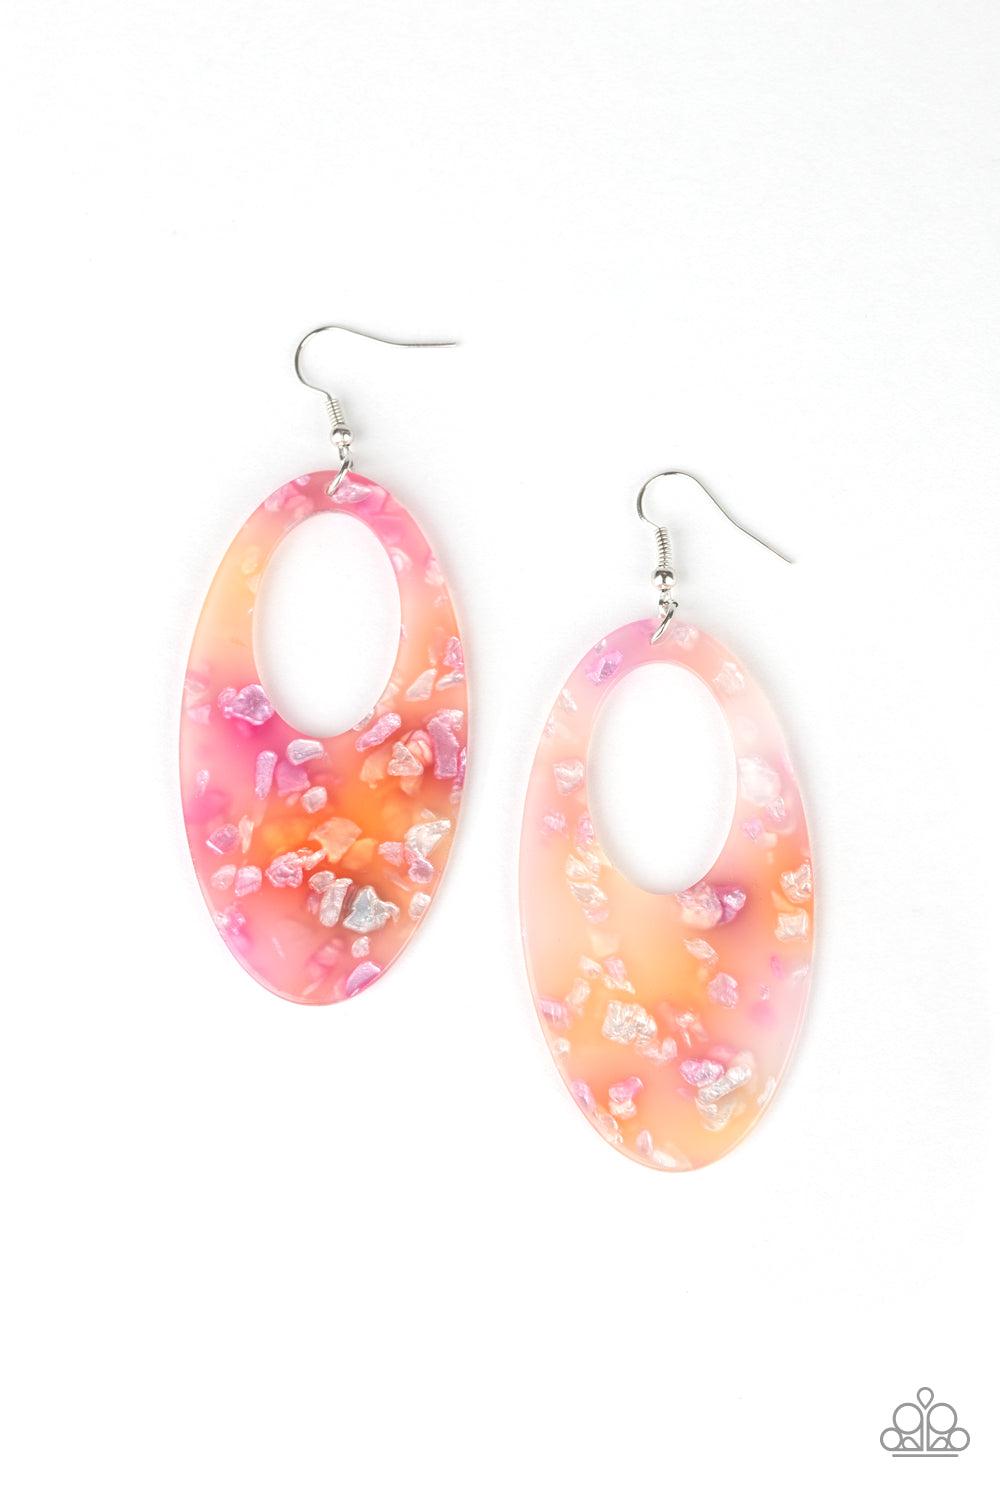 Rainbow Springs Multi-color Coral and Pink Acrylic Earrings - Paparazzi Accessories-CarasShop.com - $5 Jewelry by Cara Jewels